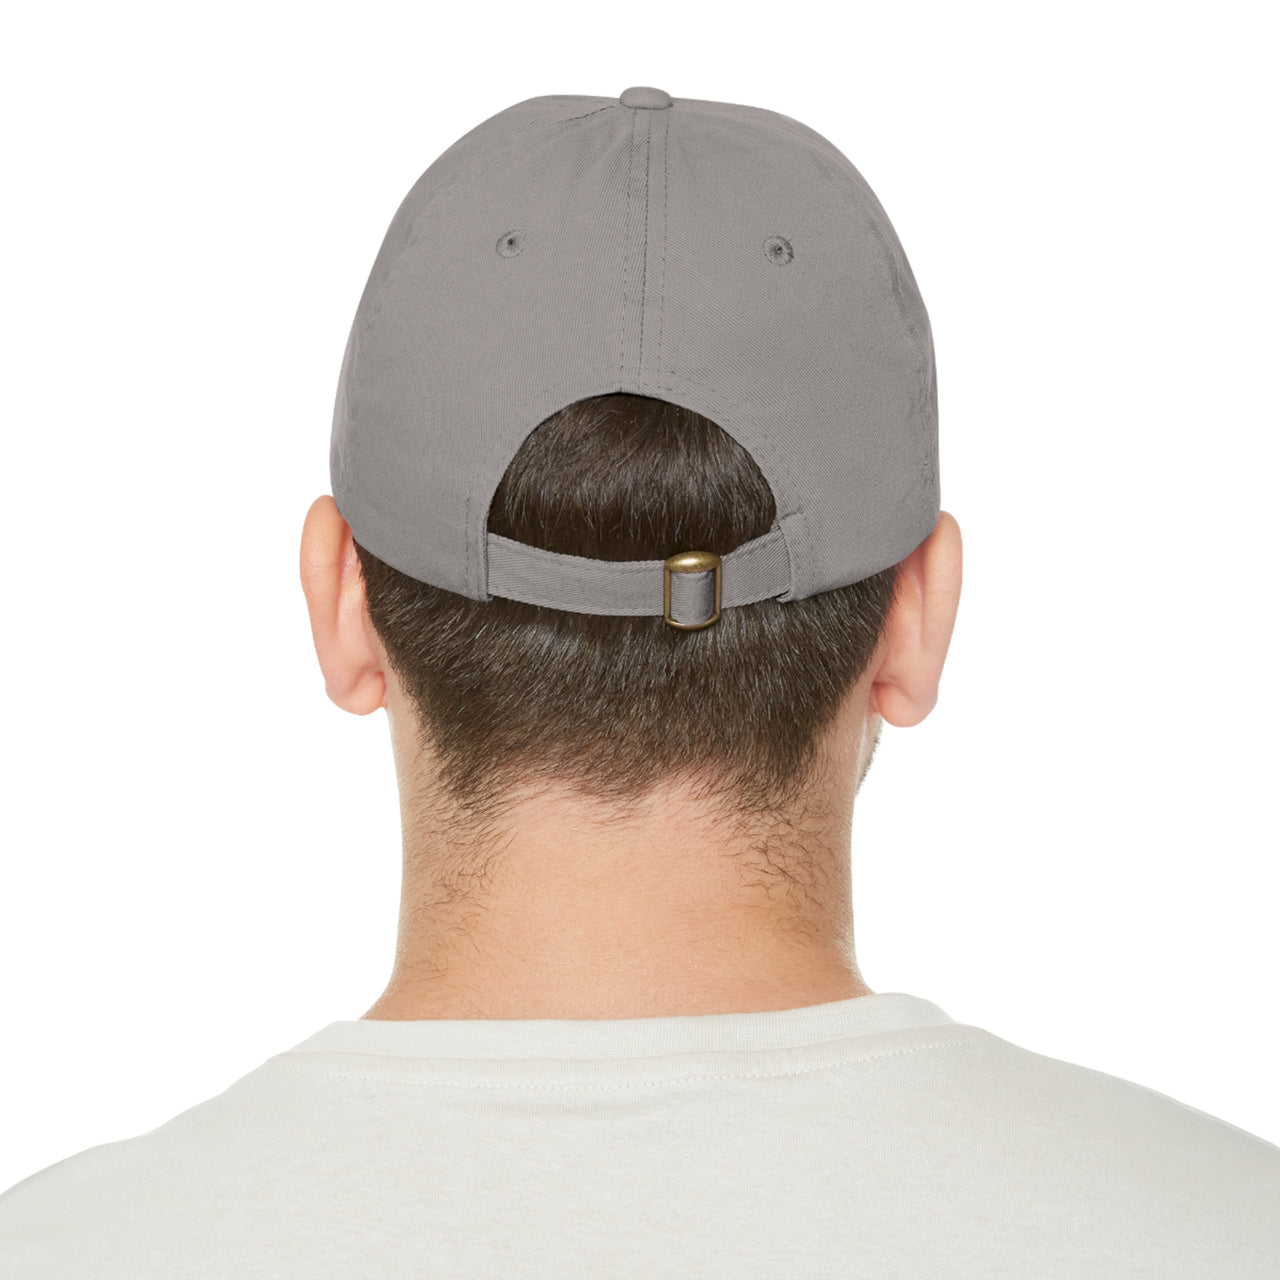 Arsenal Gunners Dad Hat with Leather Patch (Round)